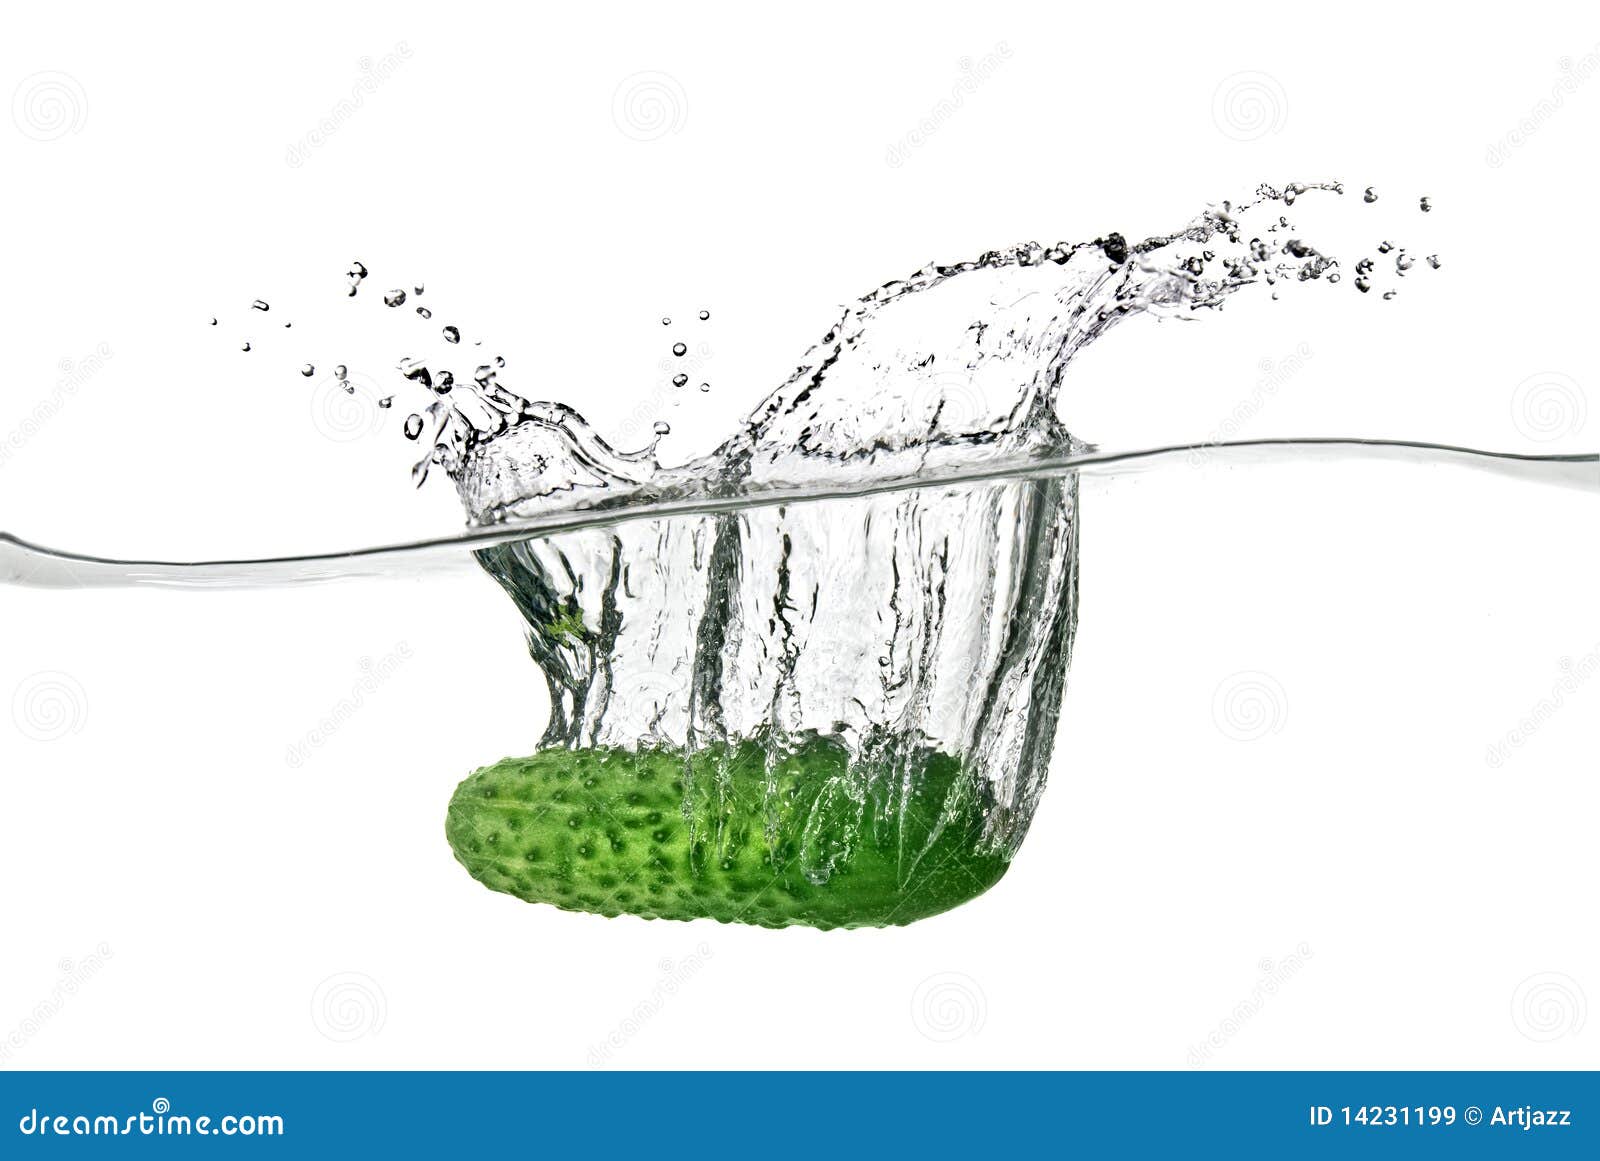 green cucumber dropped into water